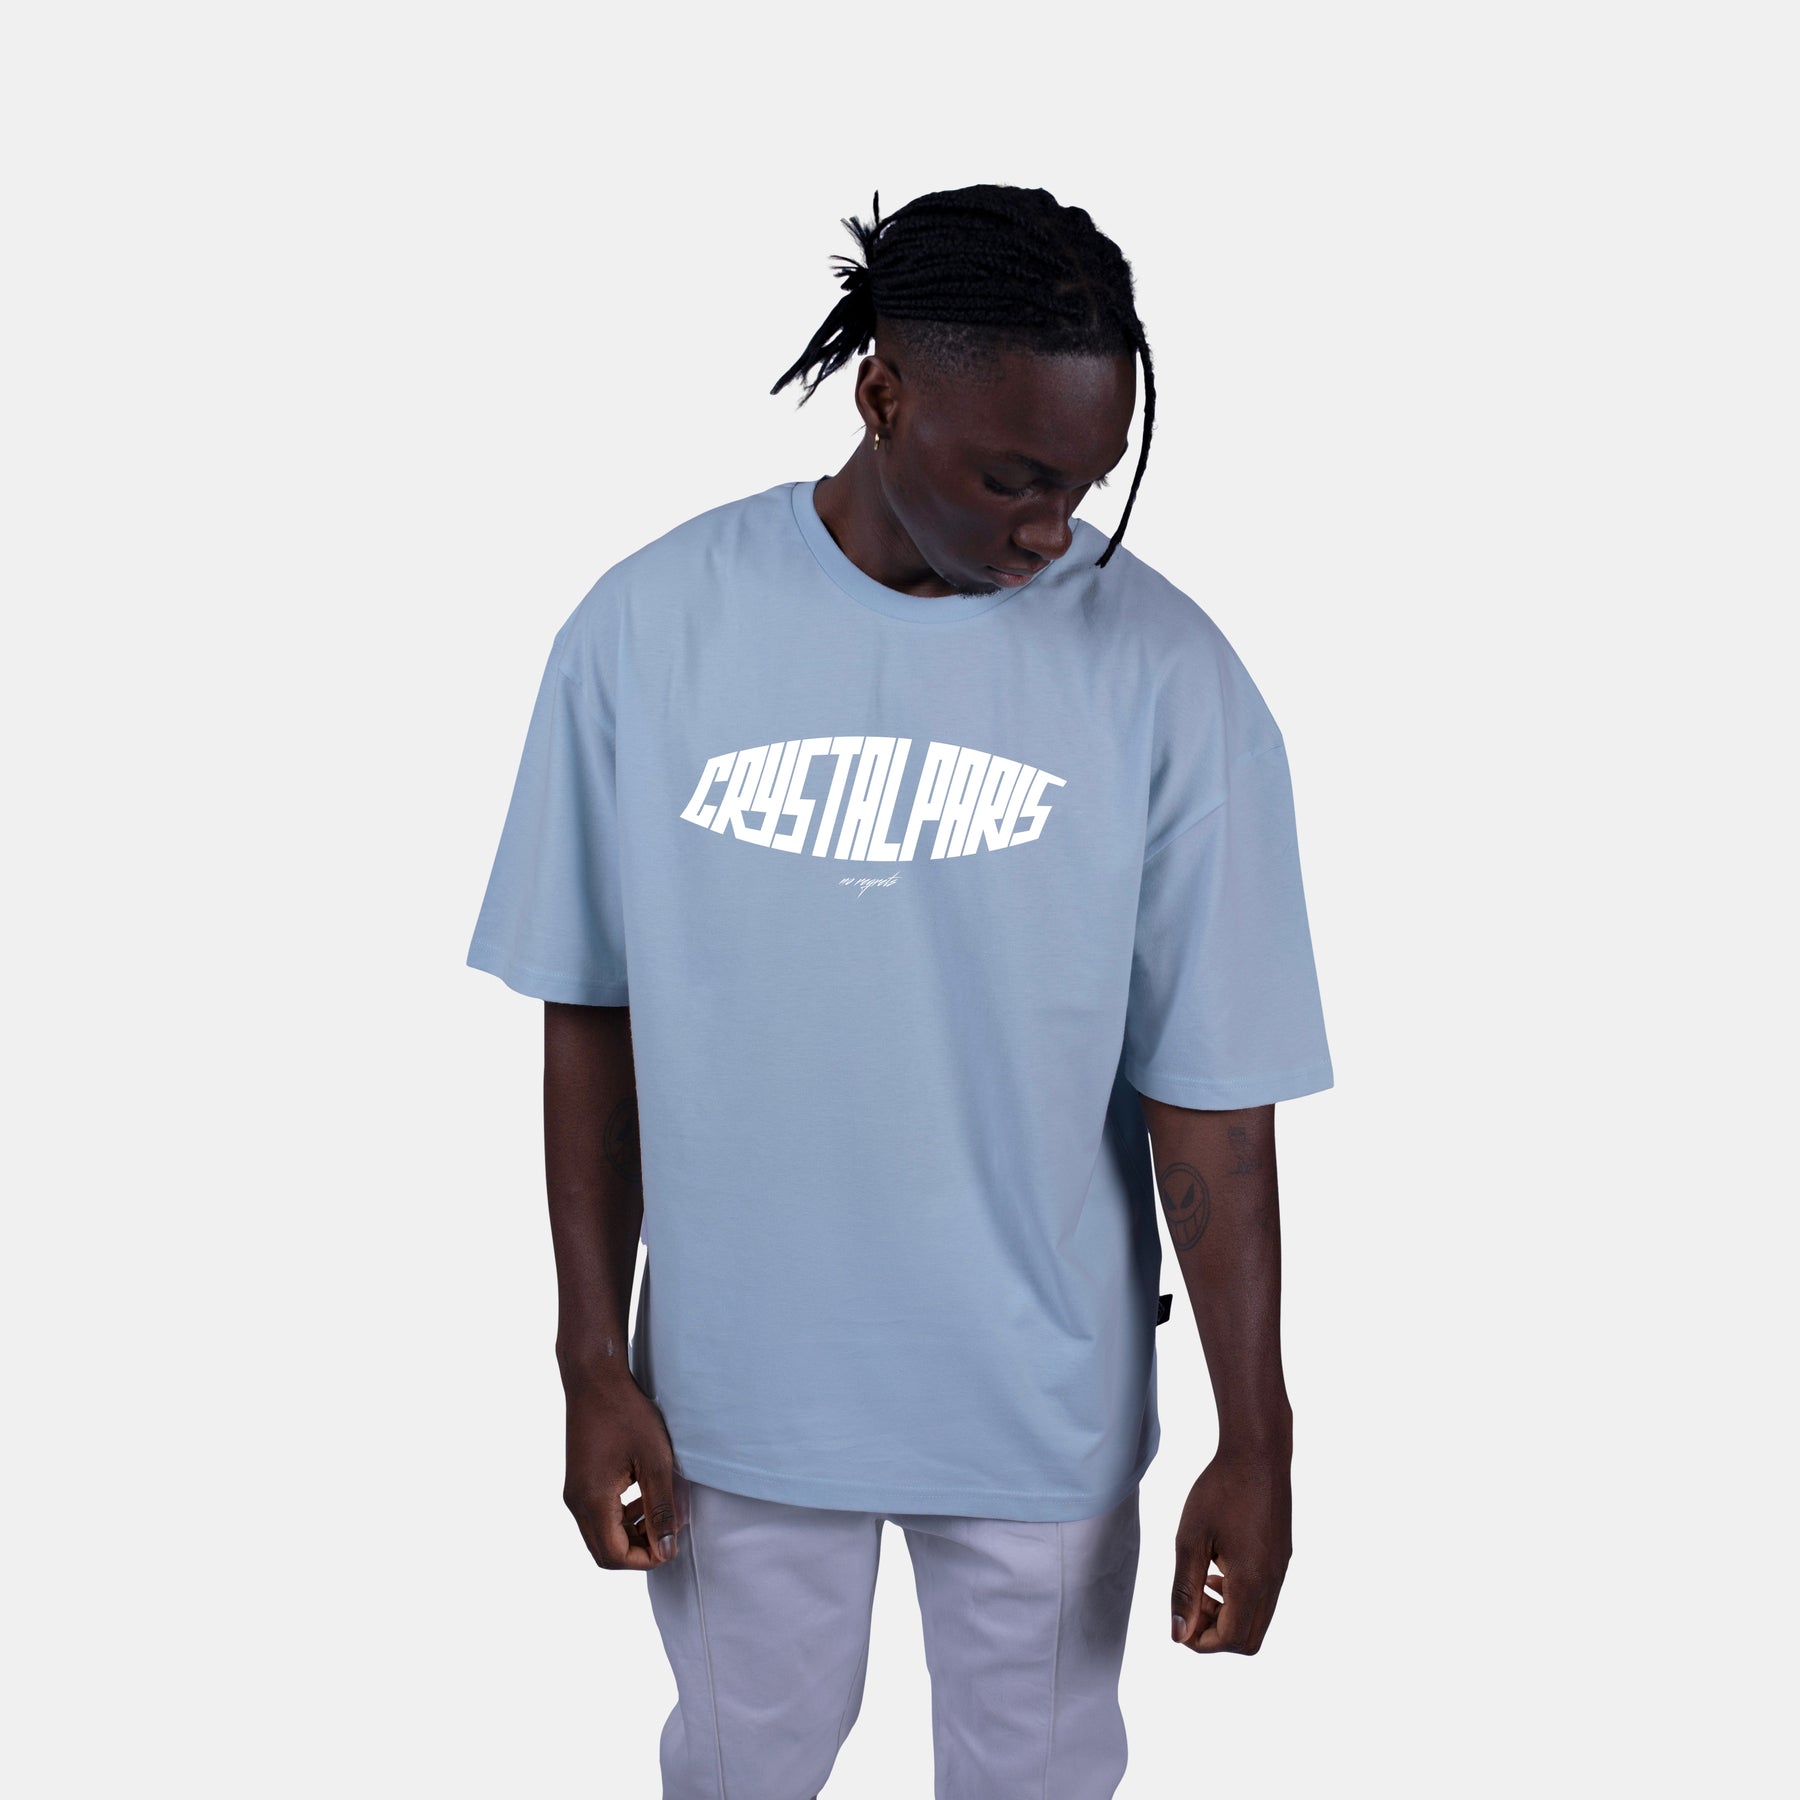 Hype T-Shirt Ice Water